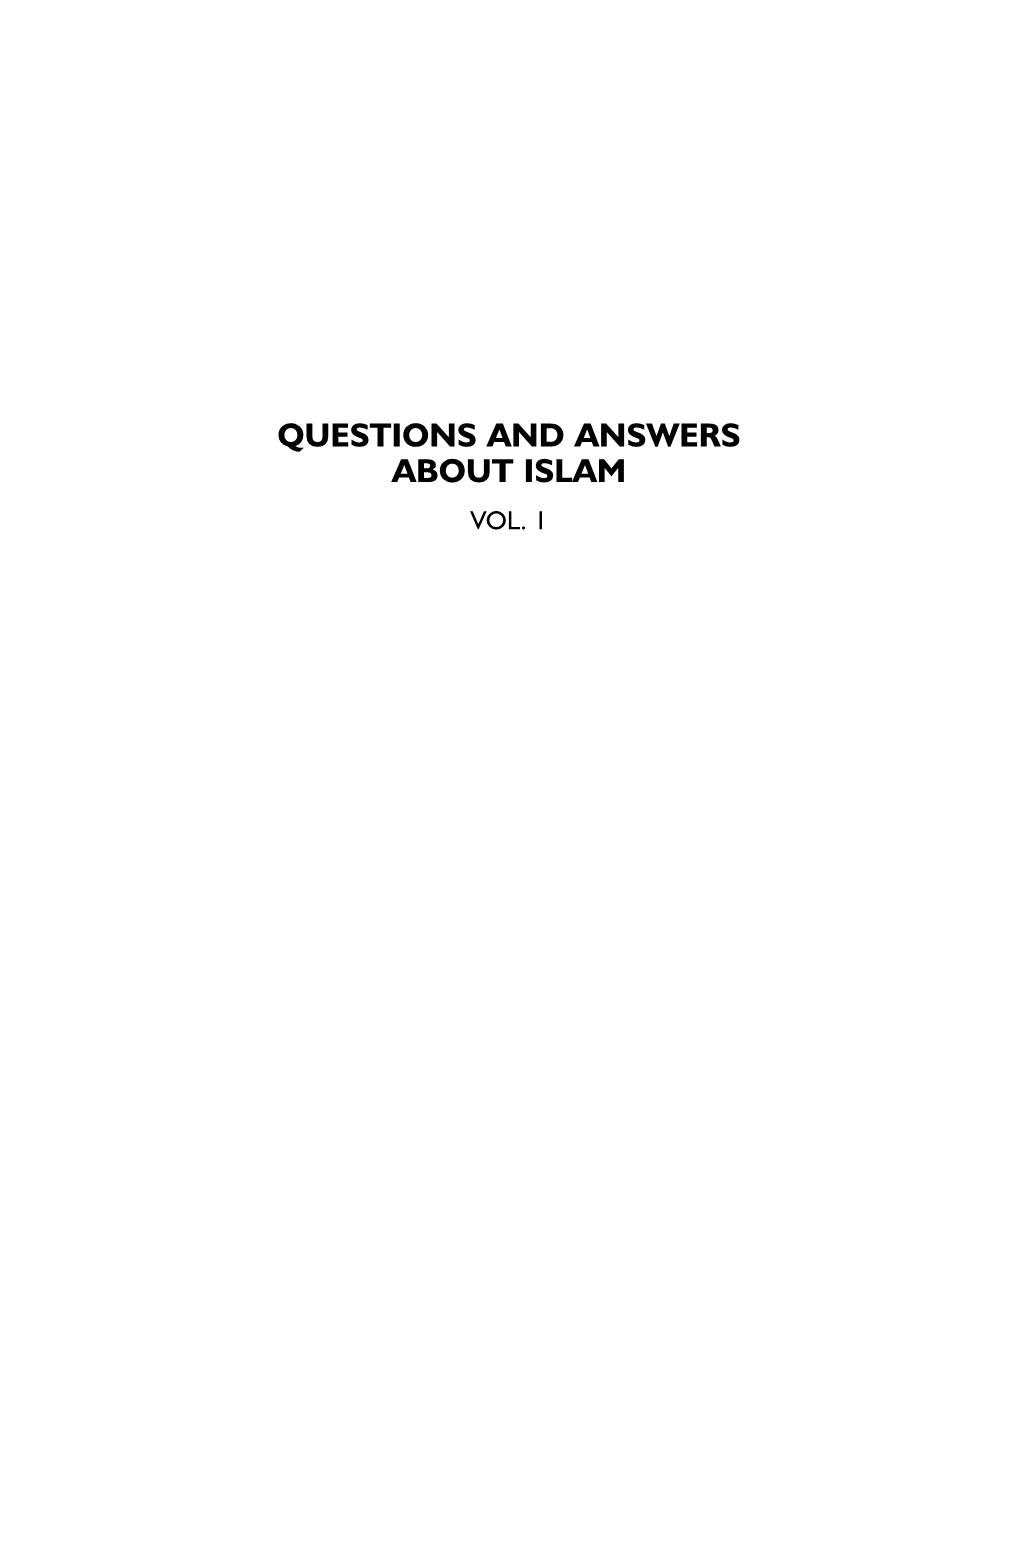 Questions and Answers About Islam Vol